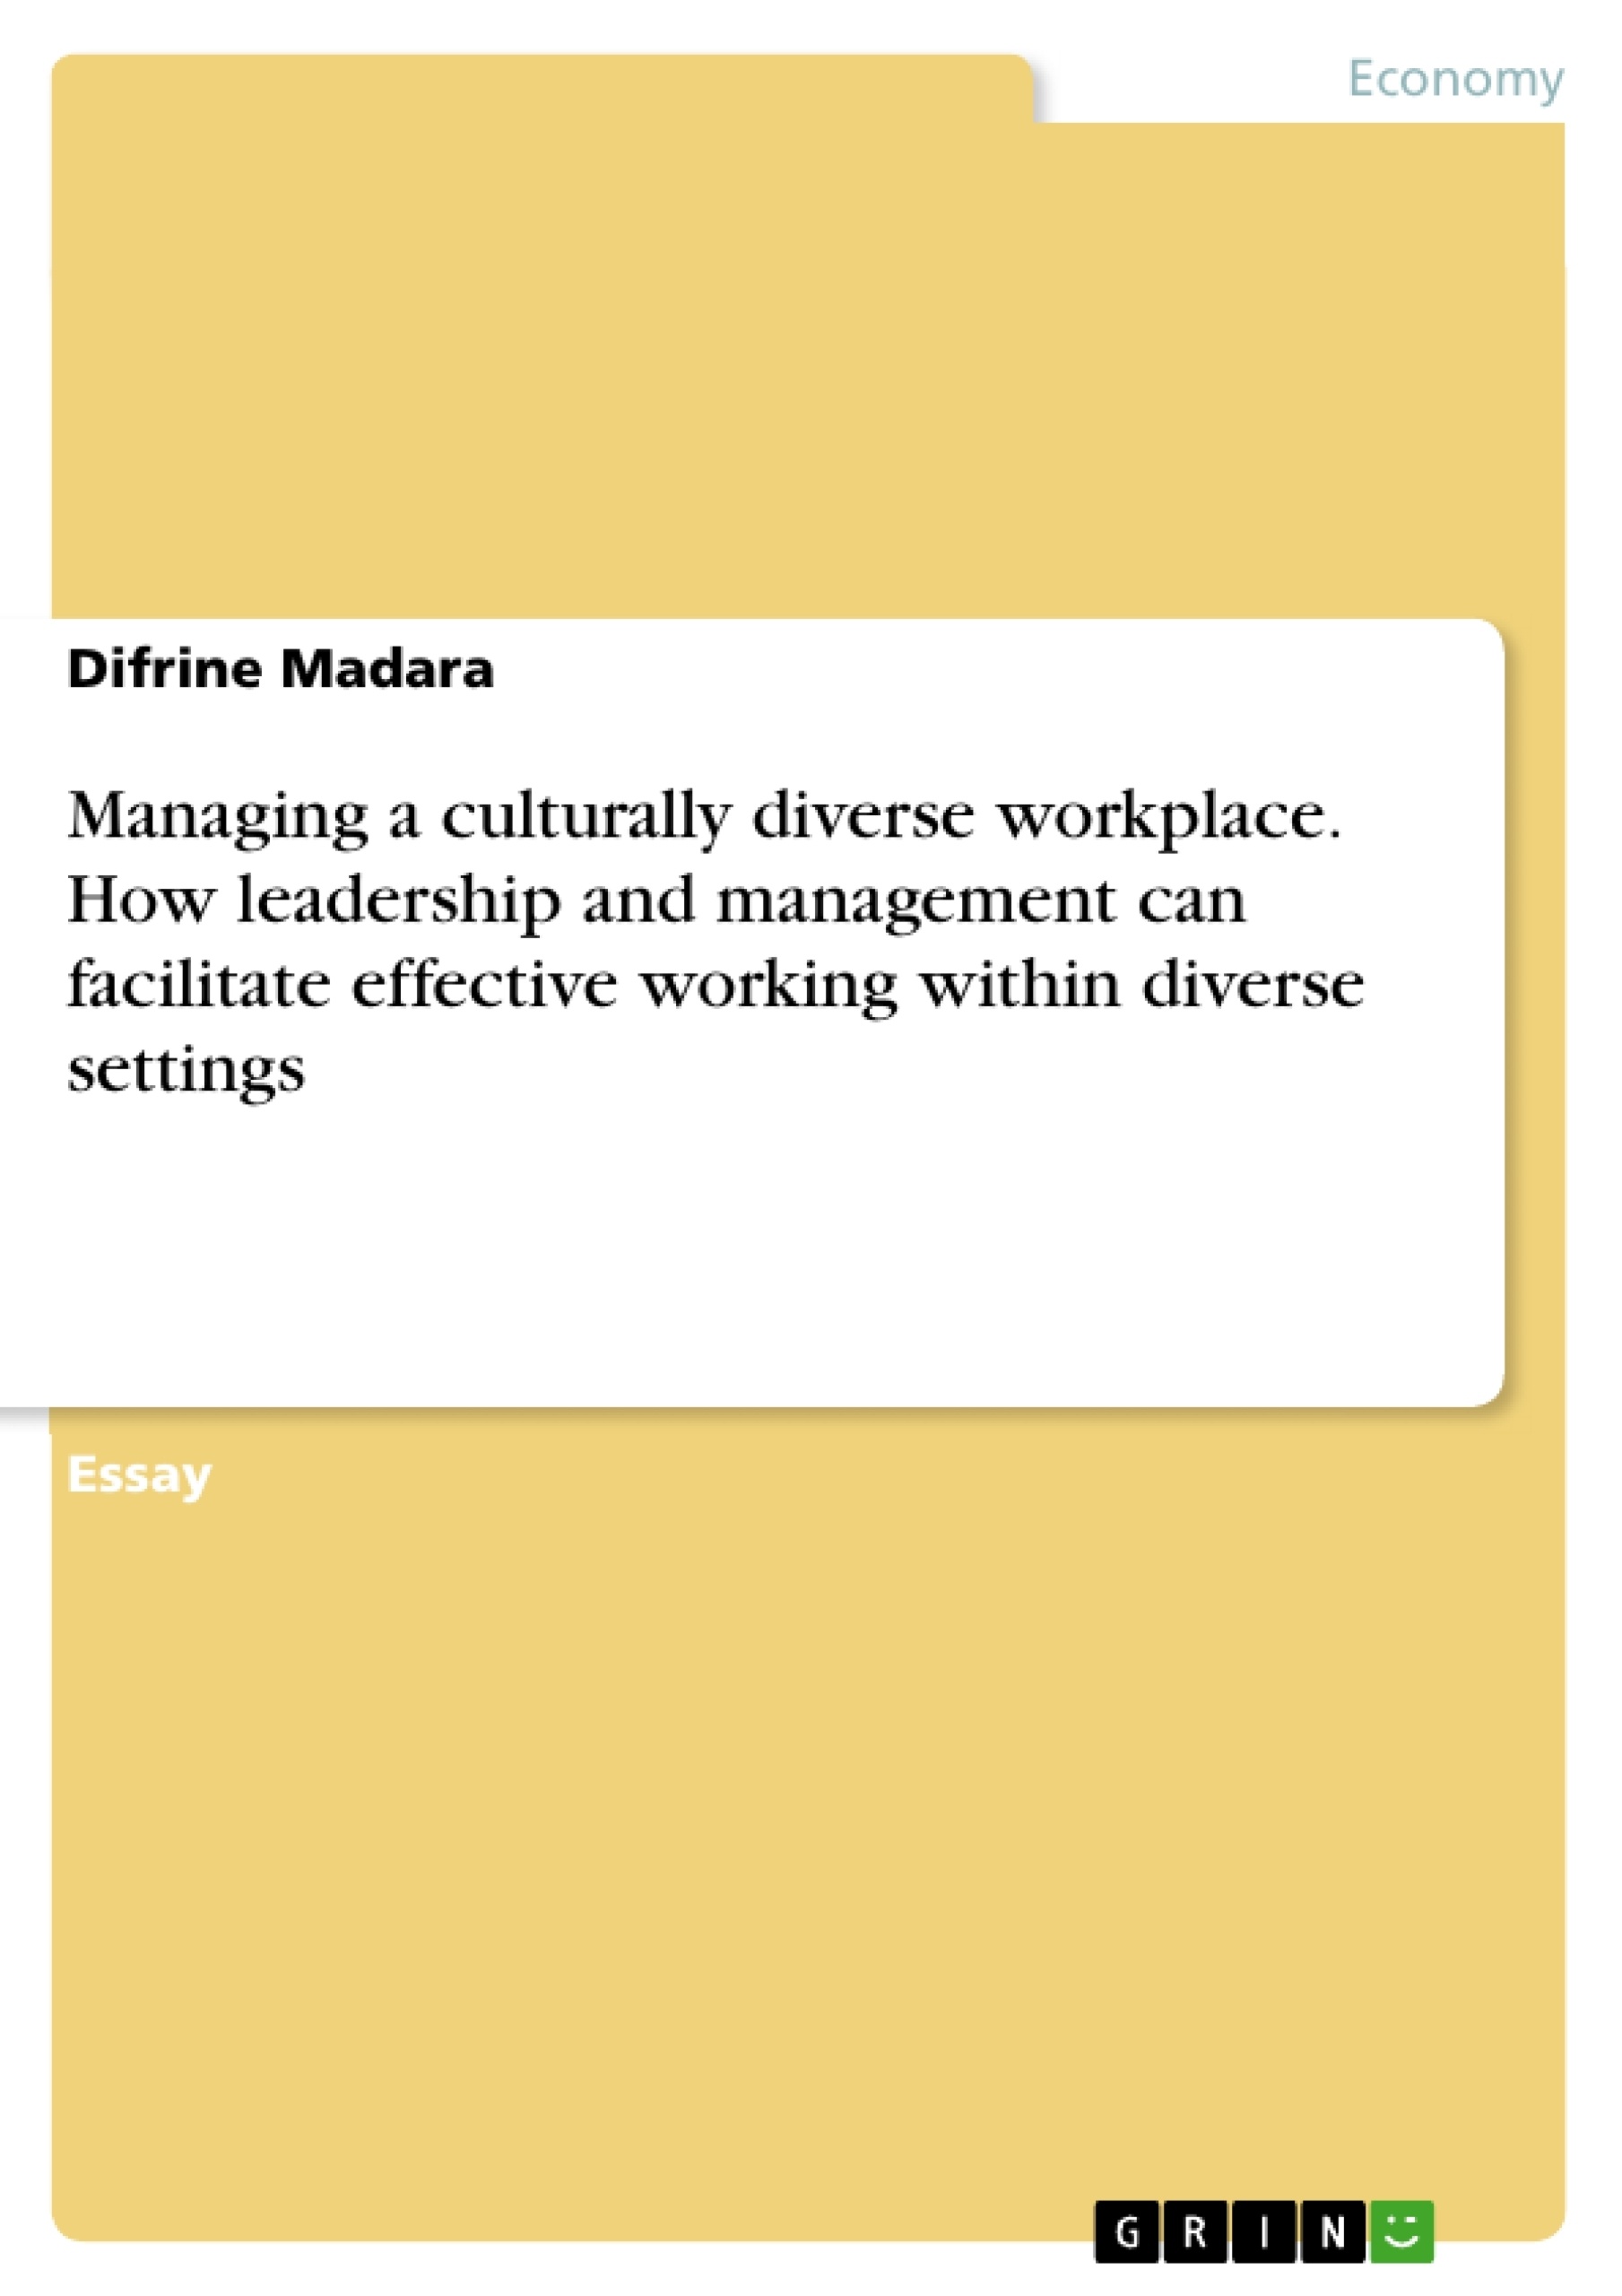 Titre: Managing a culturally diverse workplace. How leadership and management can facilitate effective working within diverse settings